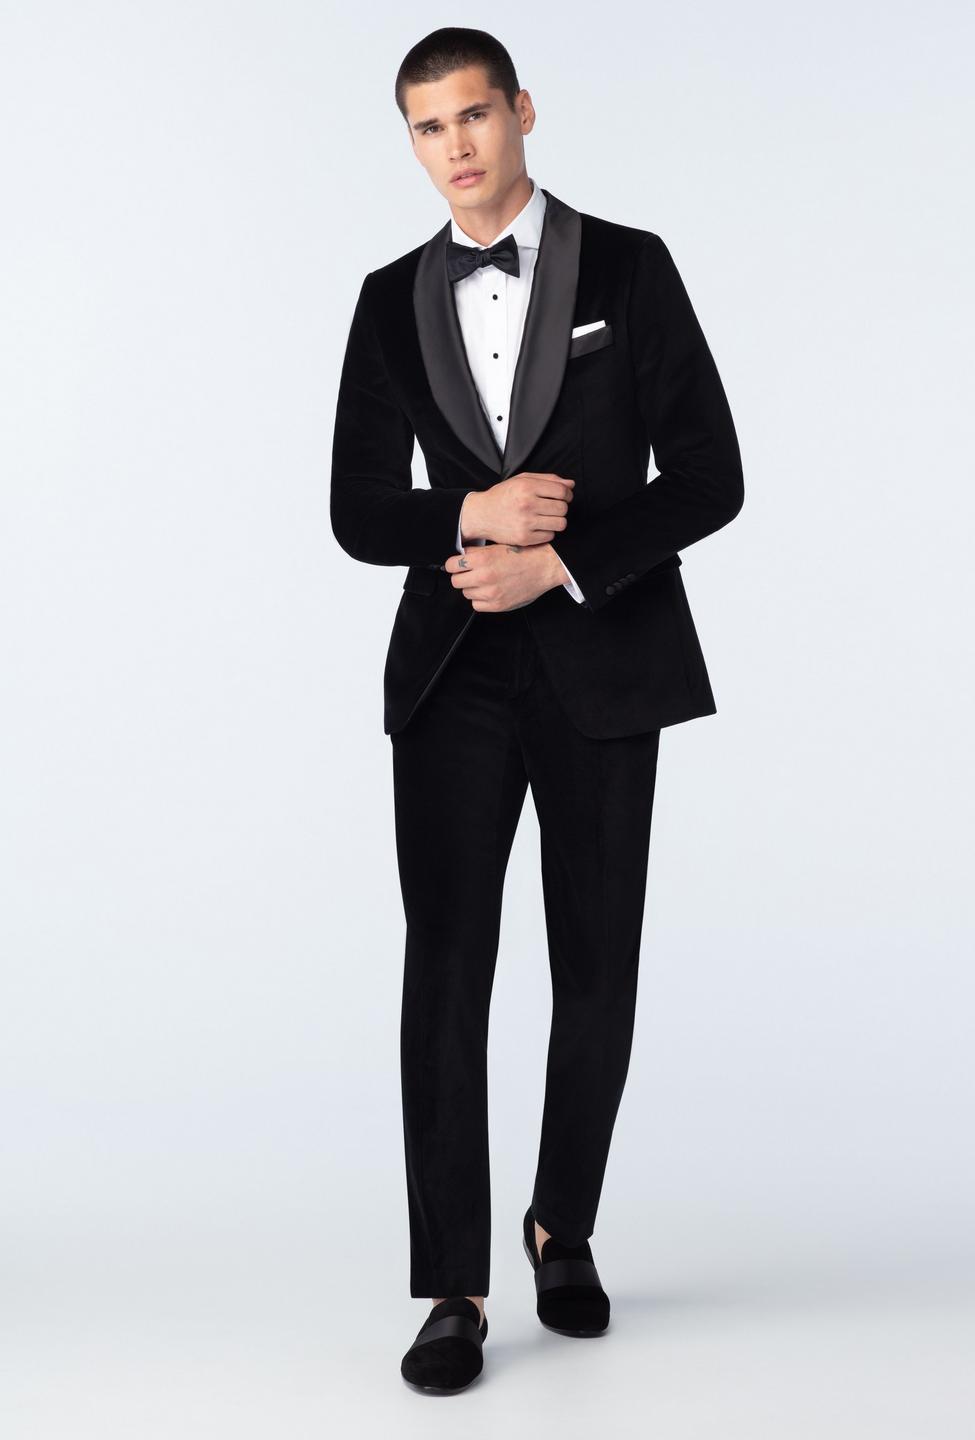 Black suit - Hardford Solid Design from Tuxedo Indochino Collection